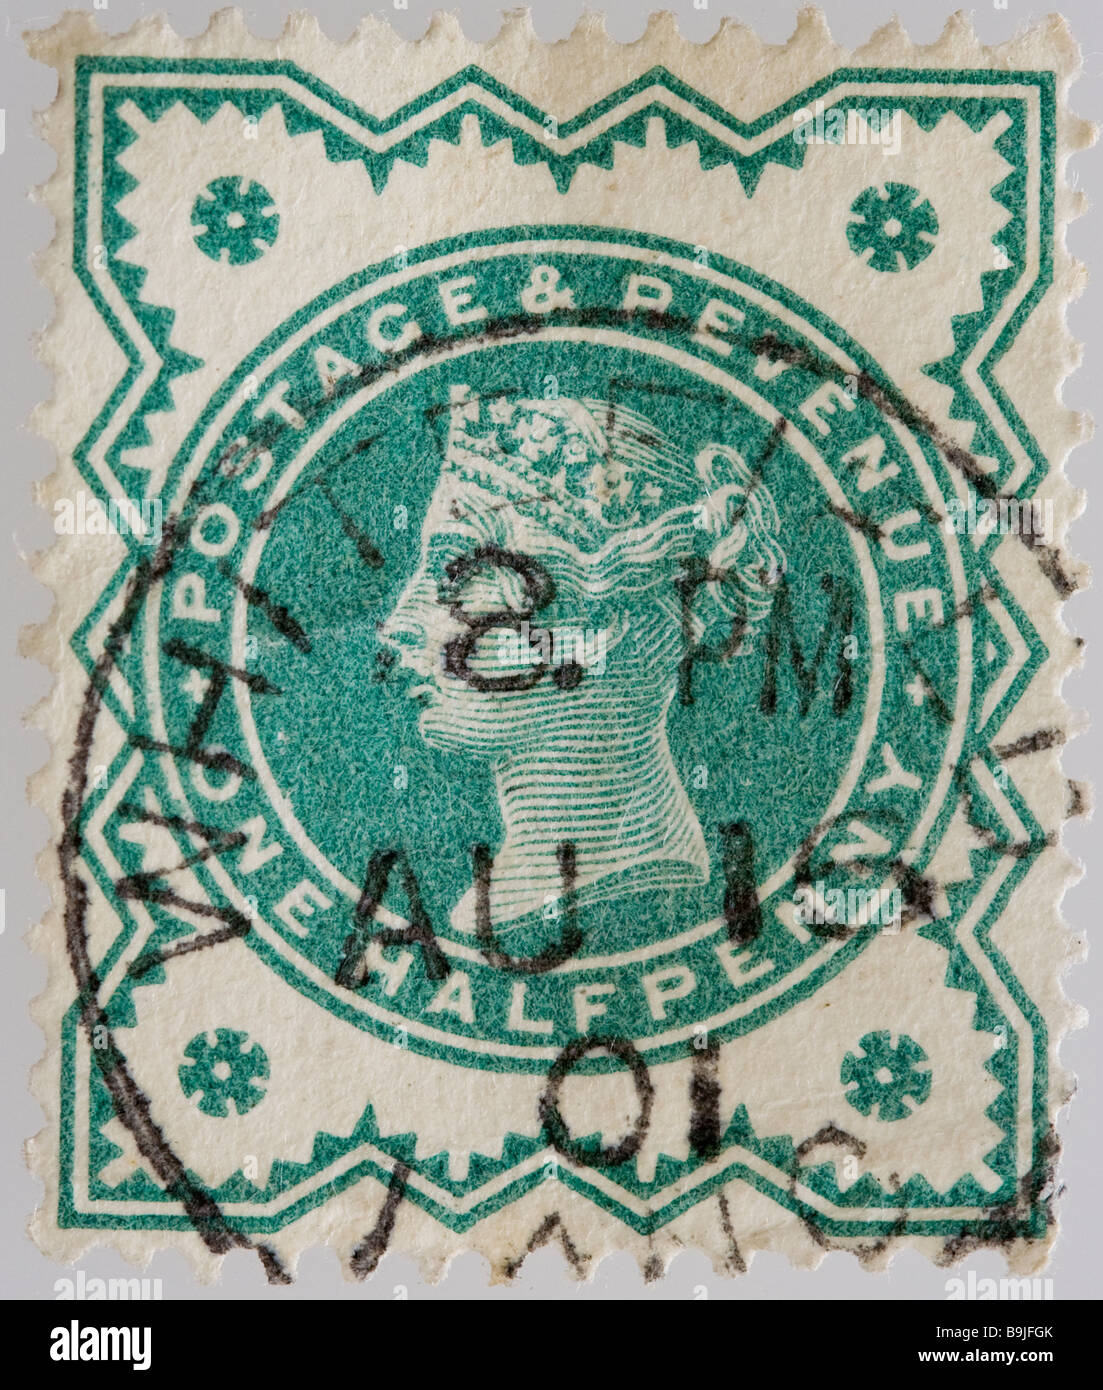 Close up of ½d, one half penny green Victorian British Postal stamp on black background issued between 1887-1900, part of the 'Jubilee Issue'. Used. Stock Photo